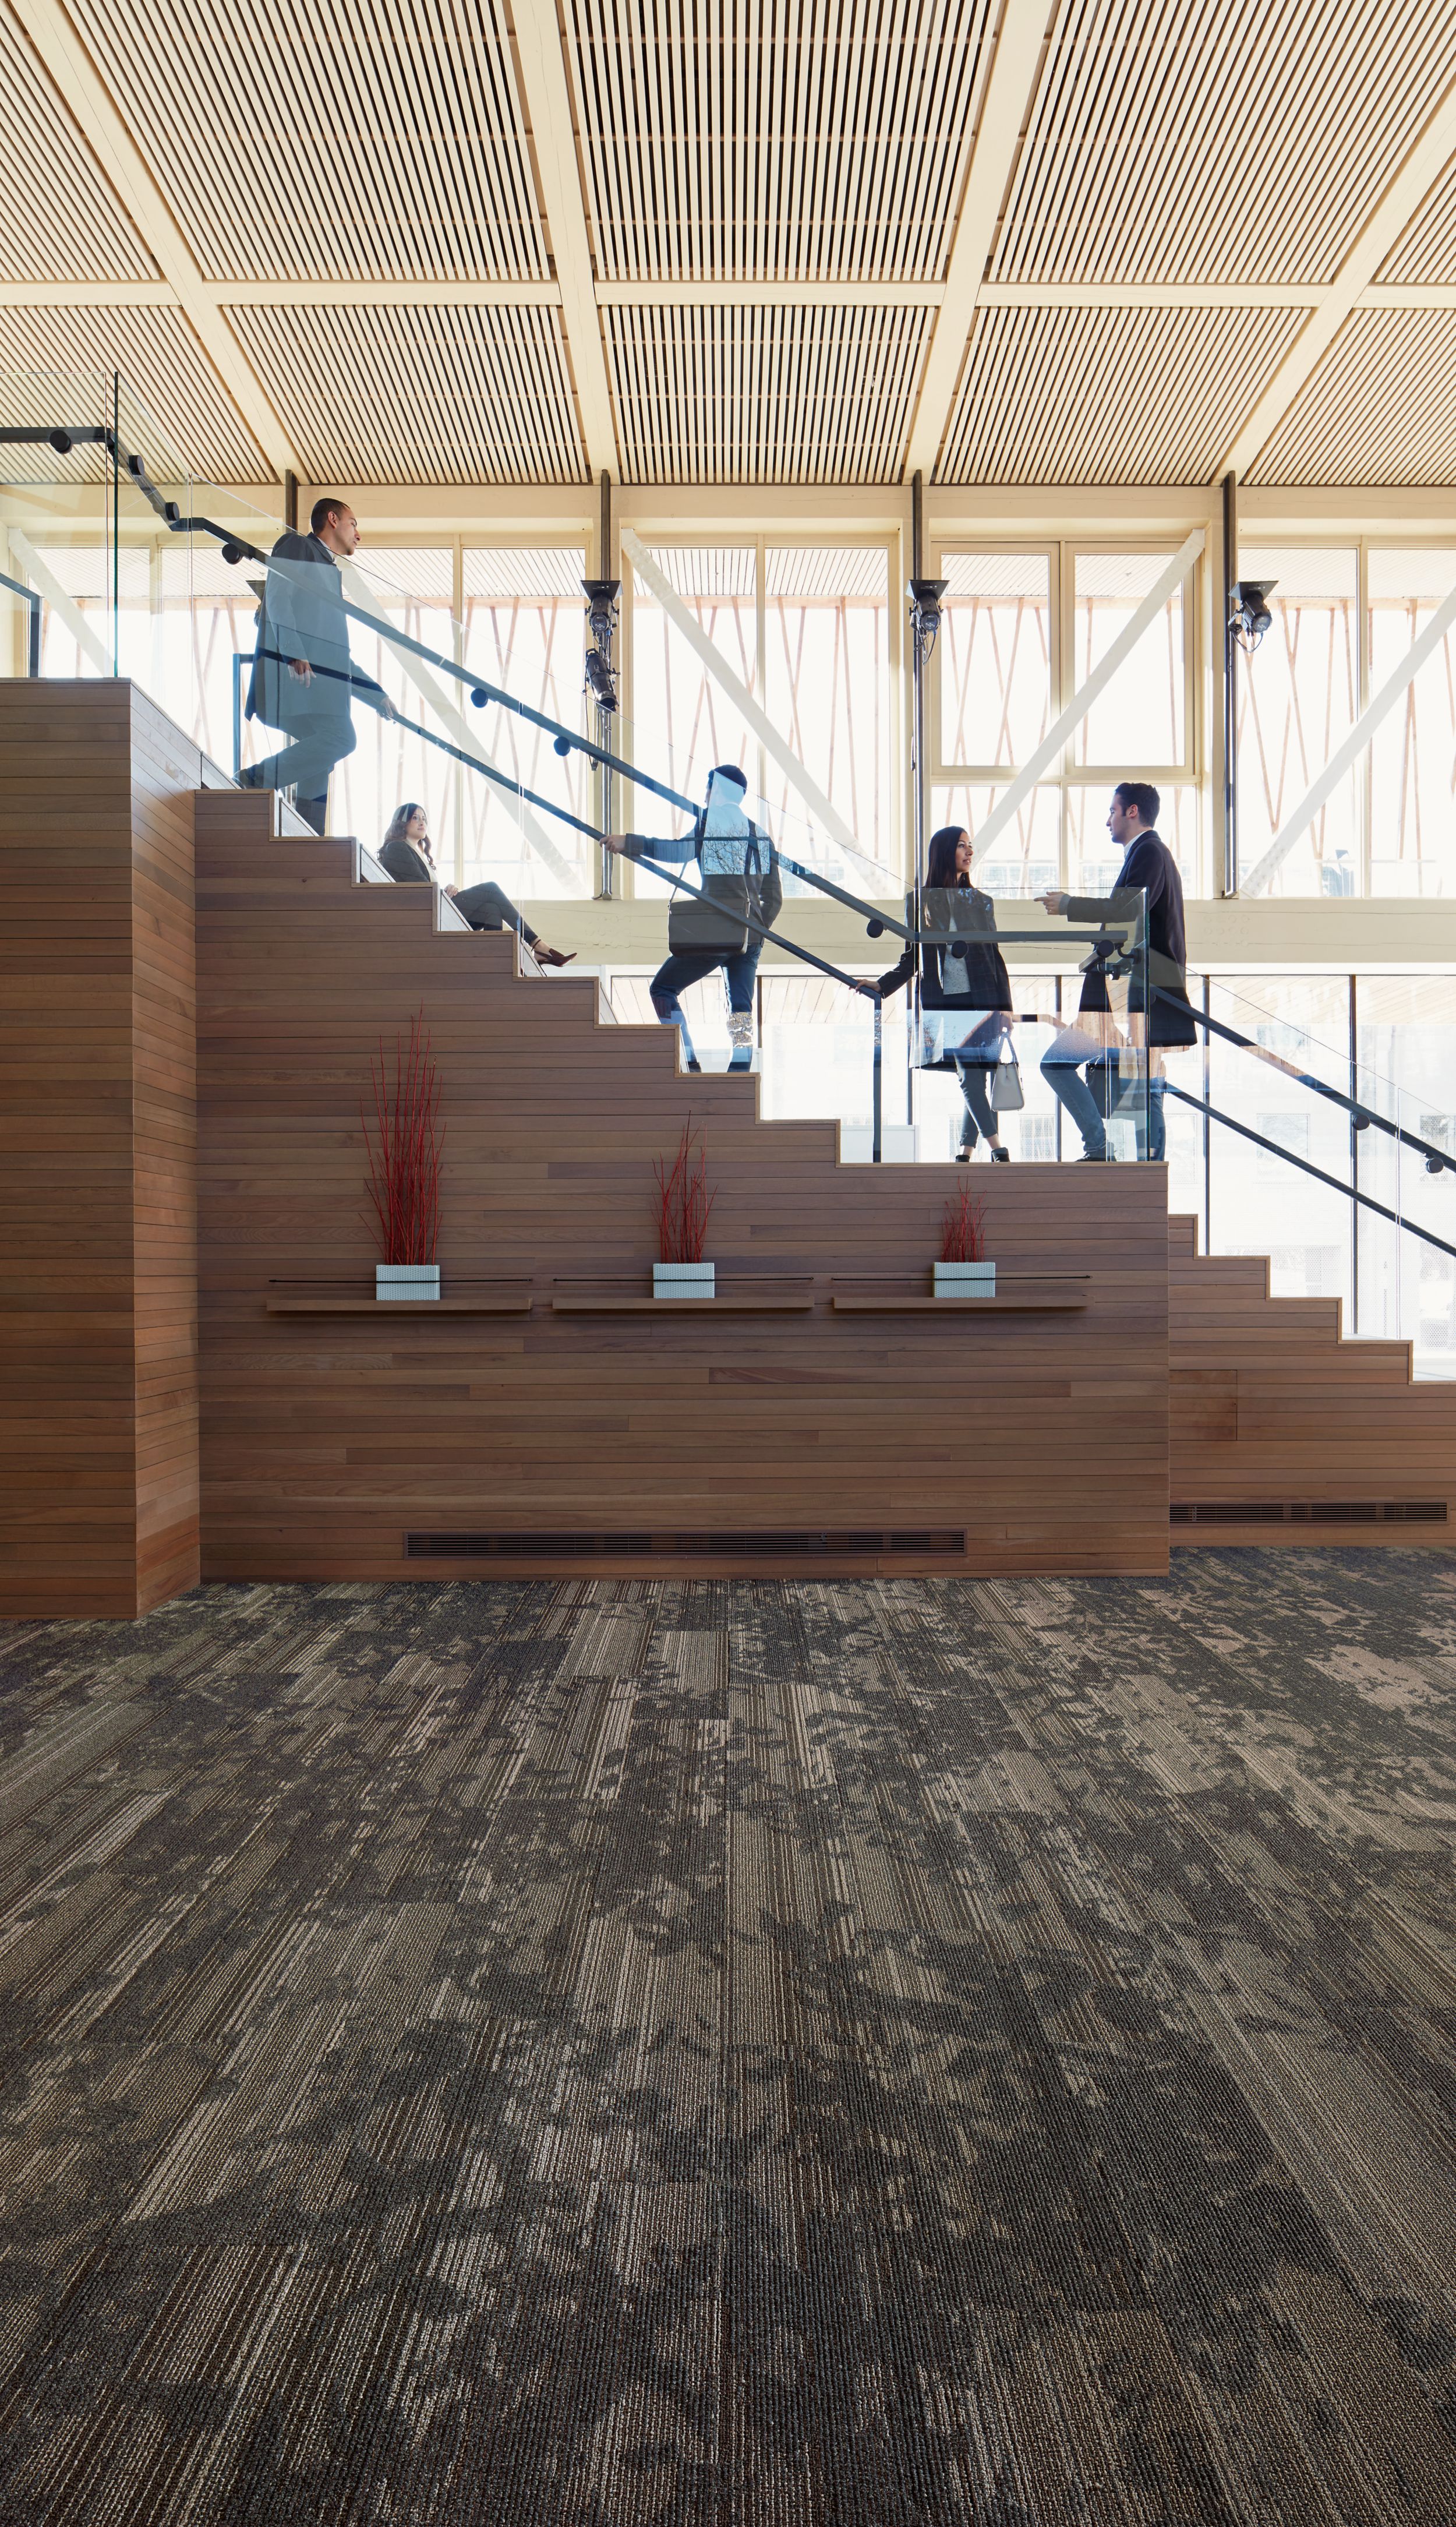 Interface Glazing plank carpet tile with wooden staircase in background image number 1